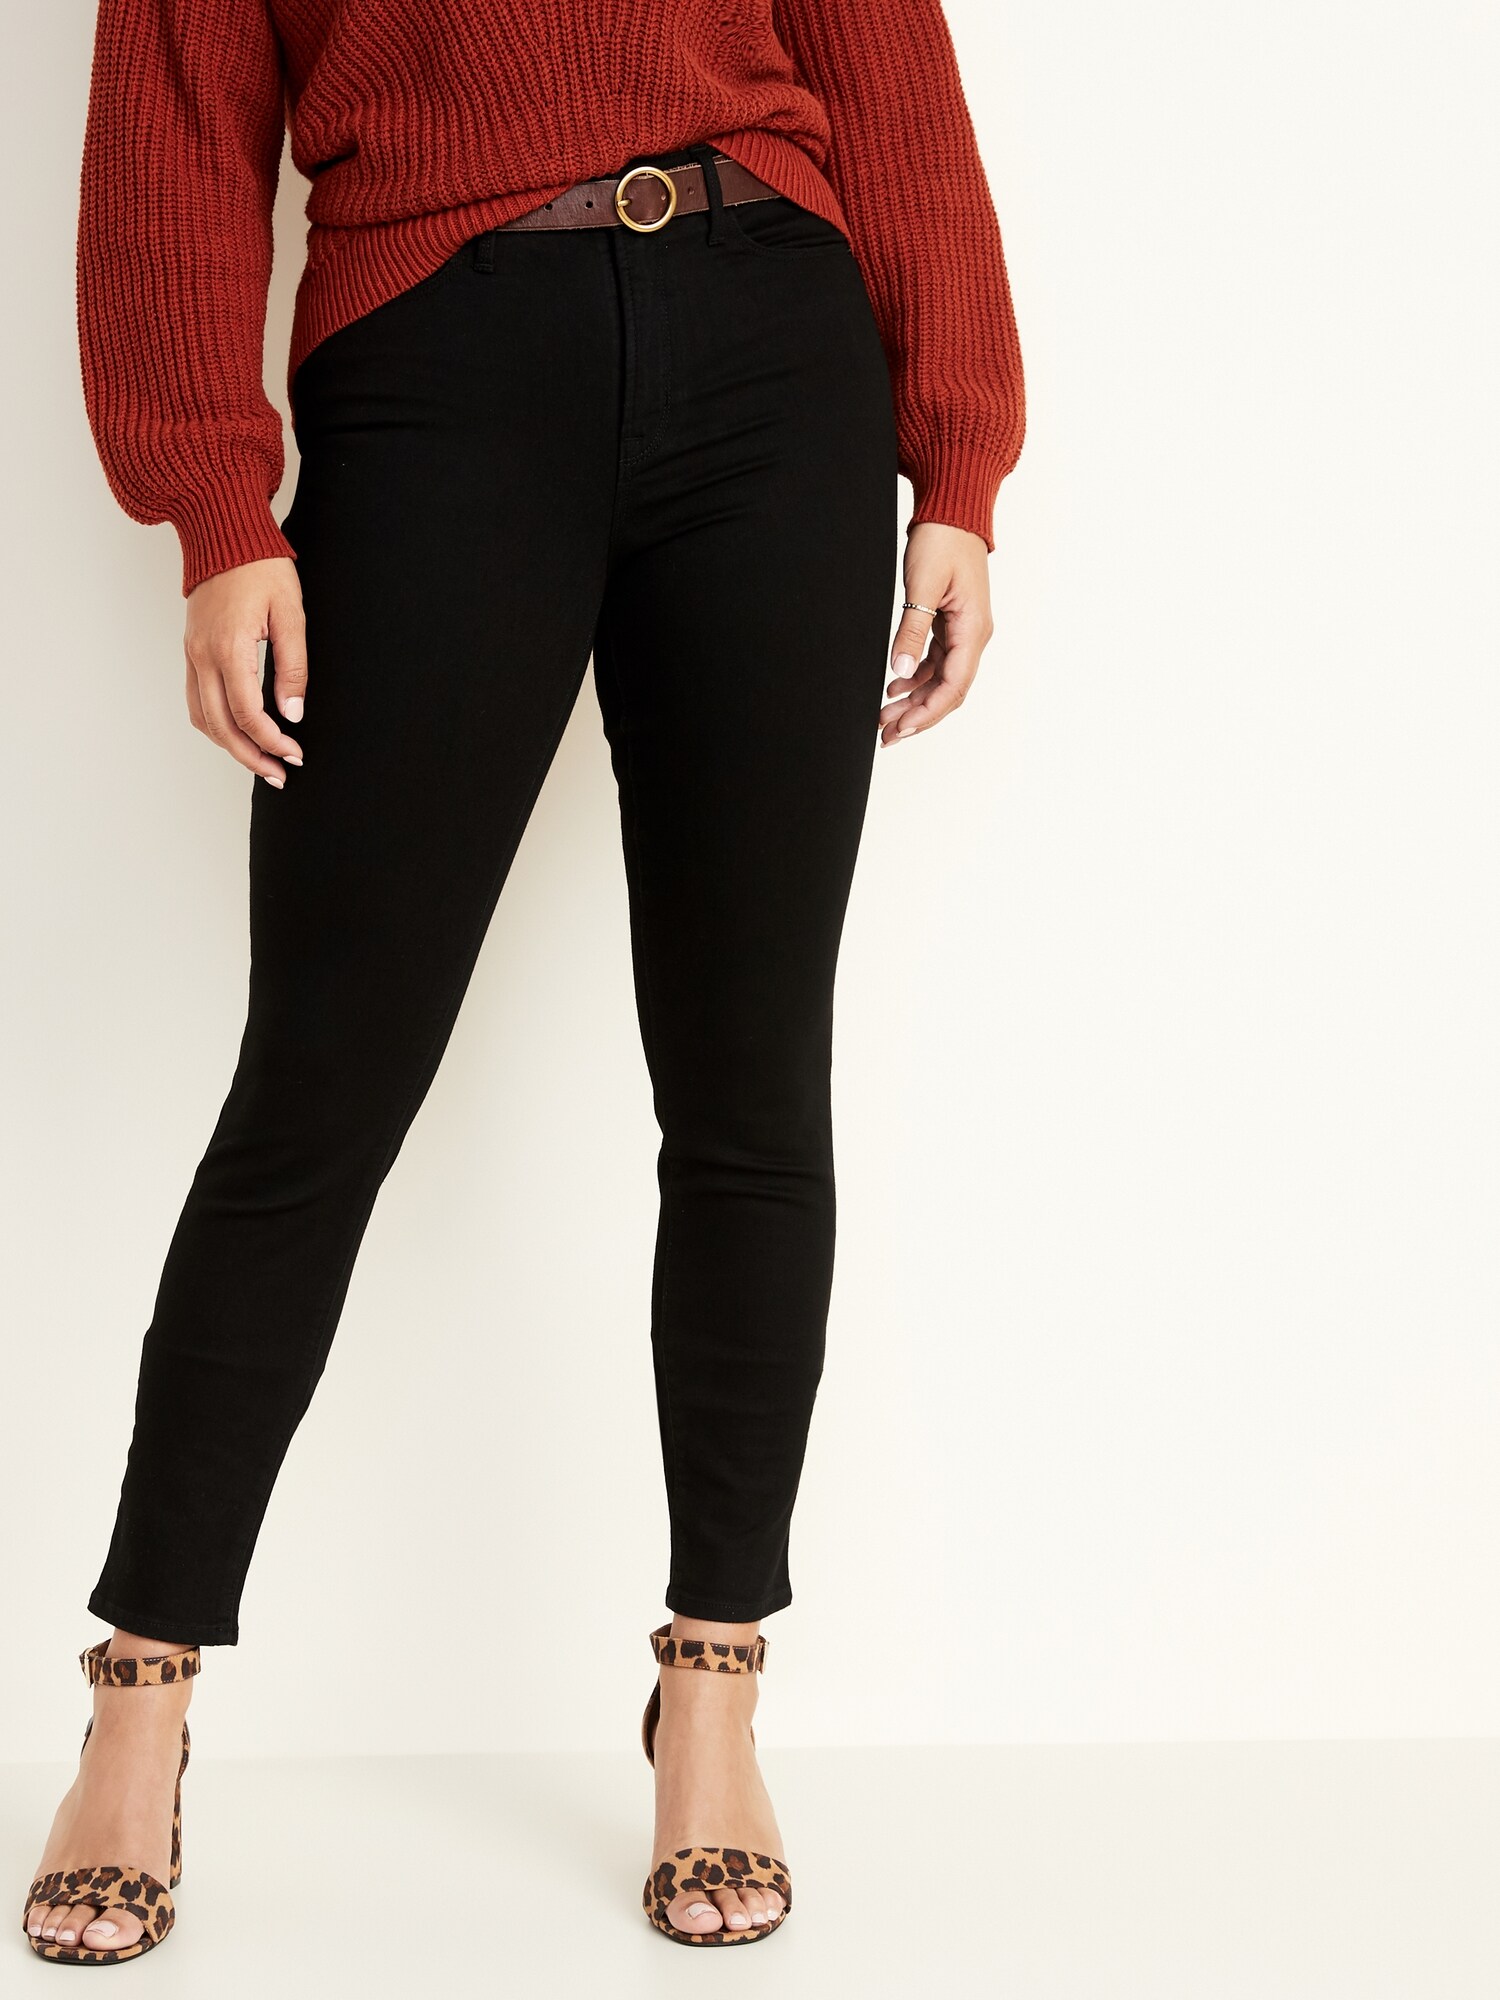 High-Waisted Pop Icon Skinny Jeans for Women